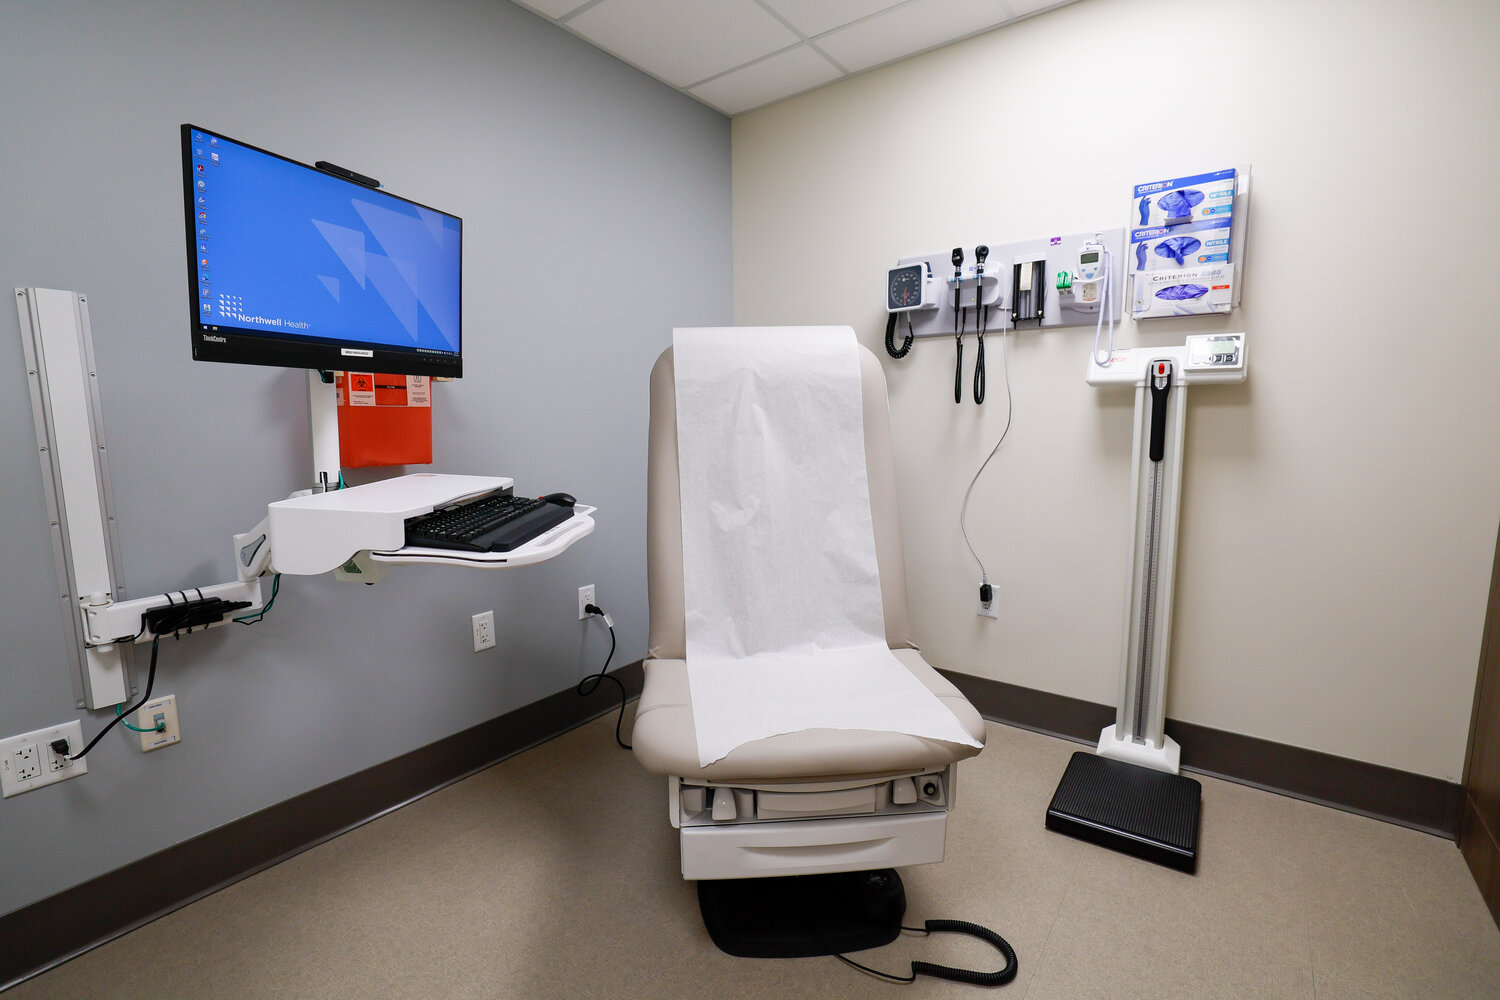 The new state-of-the-art center will provide accessibility, convenience, and relief to patients.